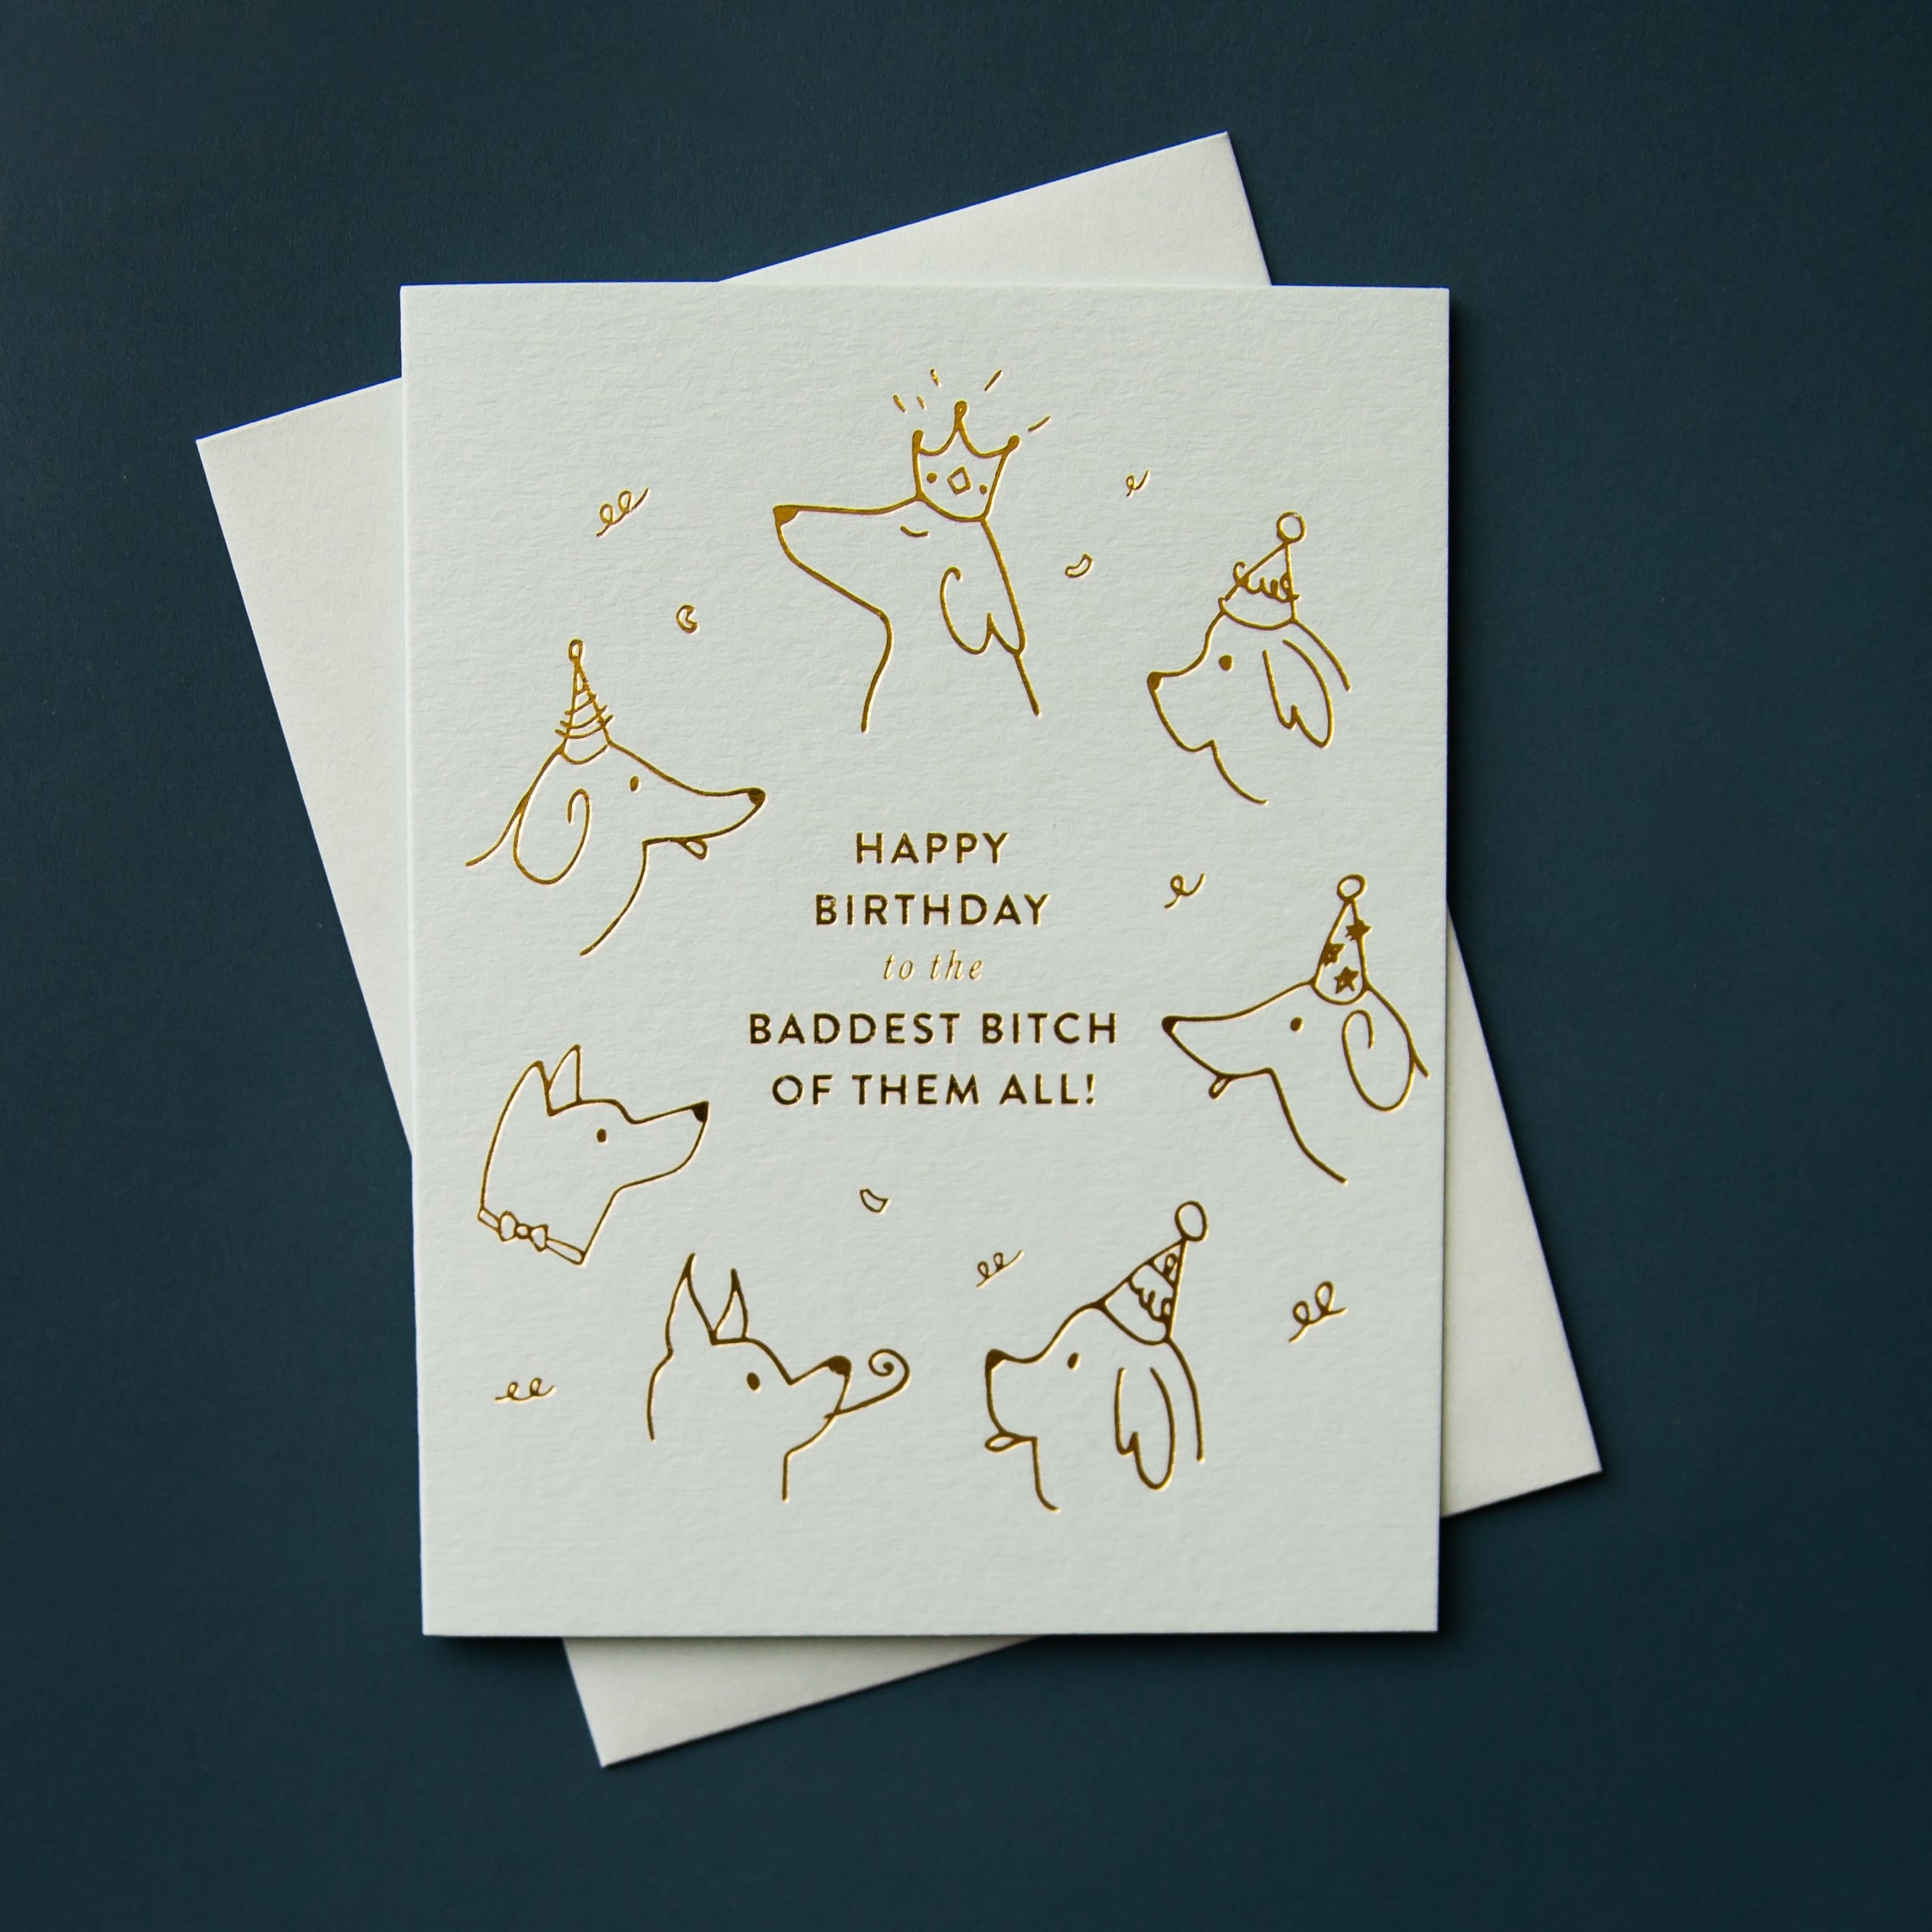 Light blue illustrated greeting card with matching envelope. The illustration is of sketchy dog heads wearing party hats, in gold foil, with text "Happy Birthday to the Baddest Bitch of Them All!"